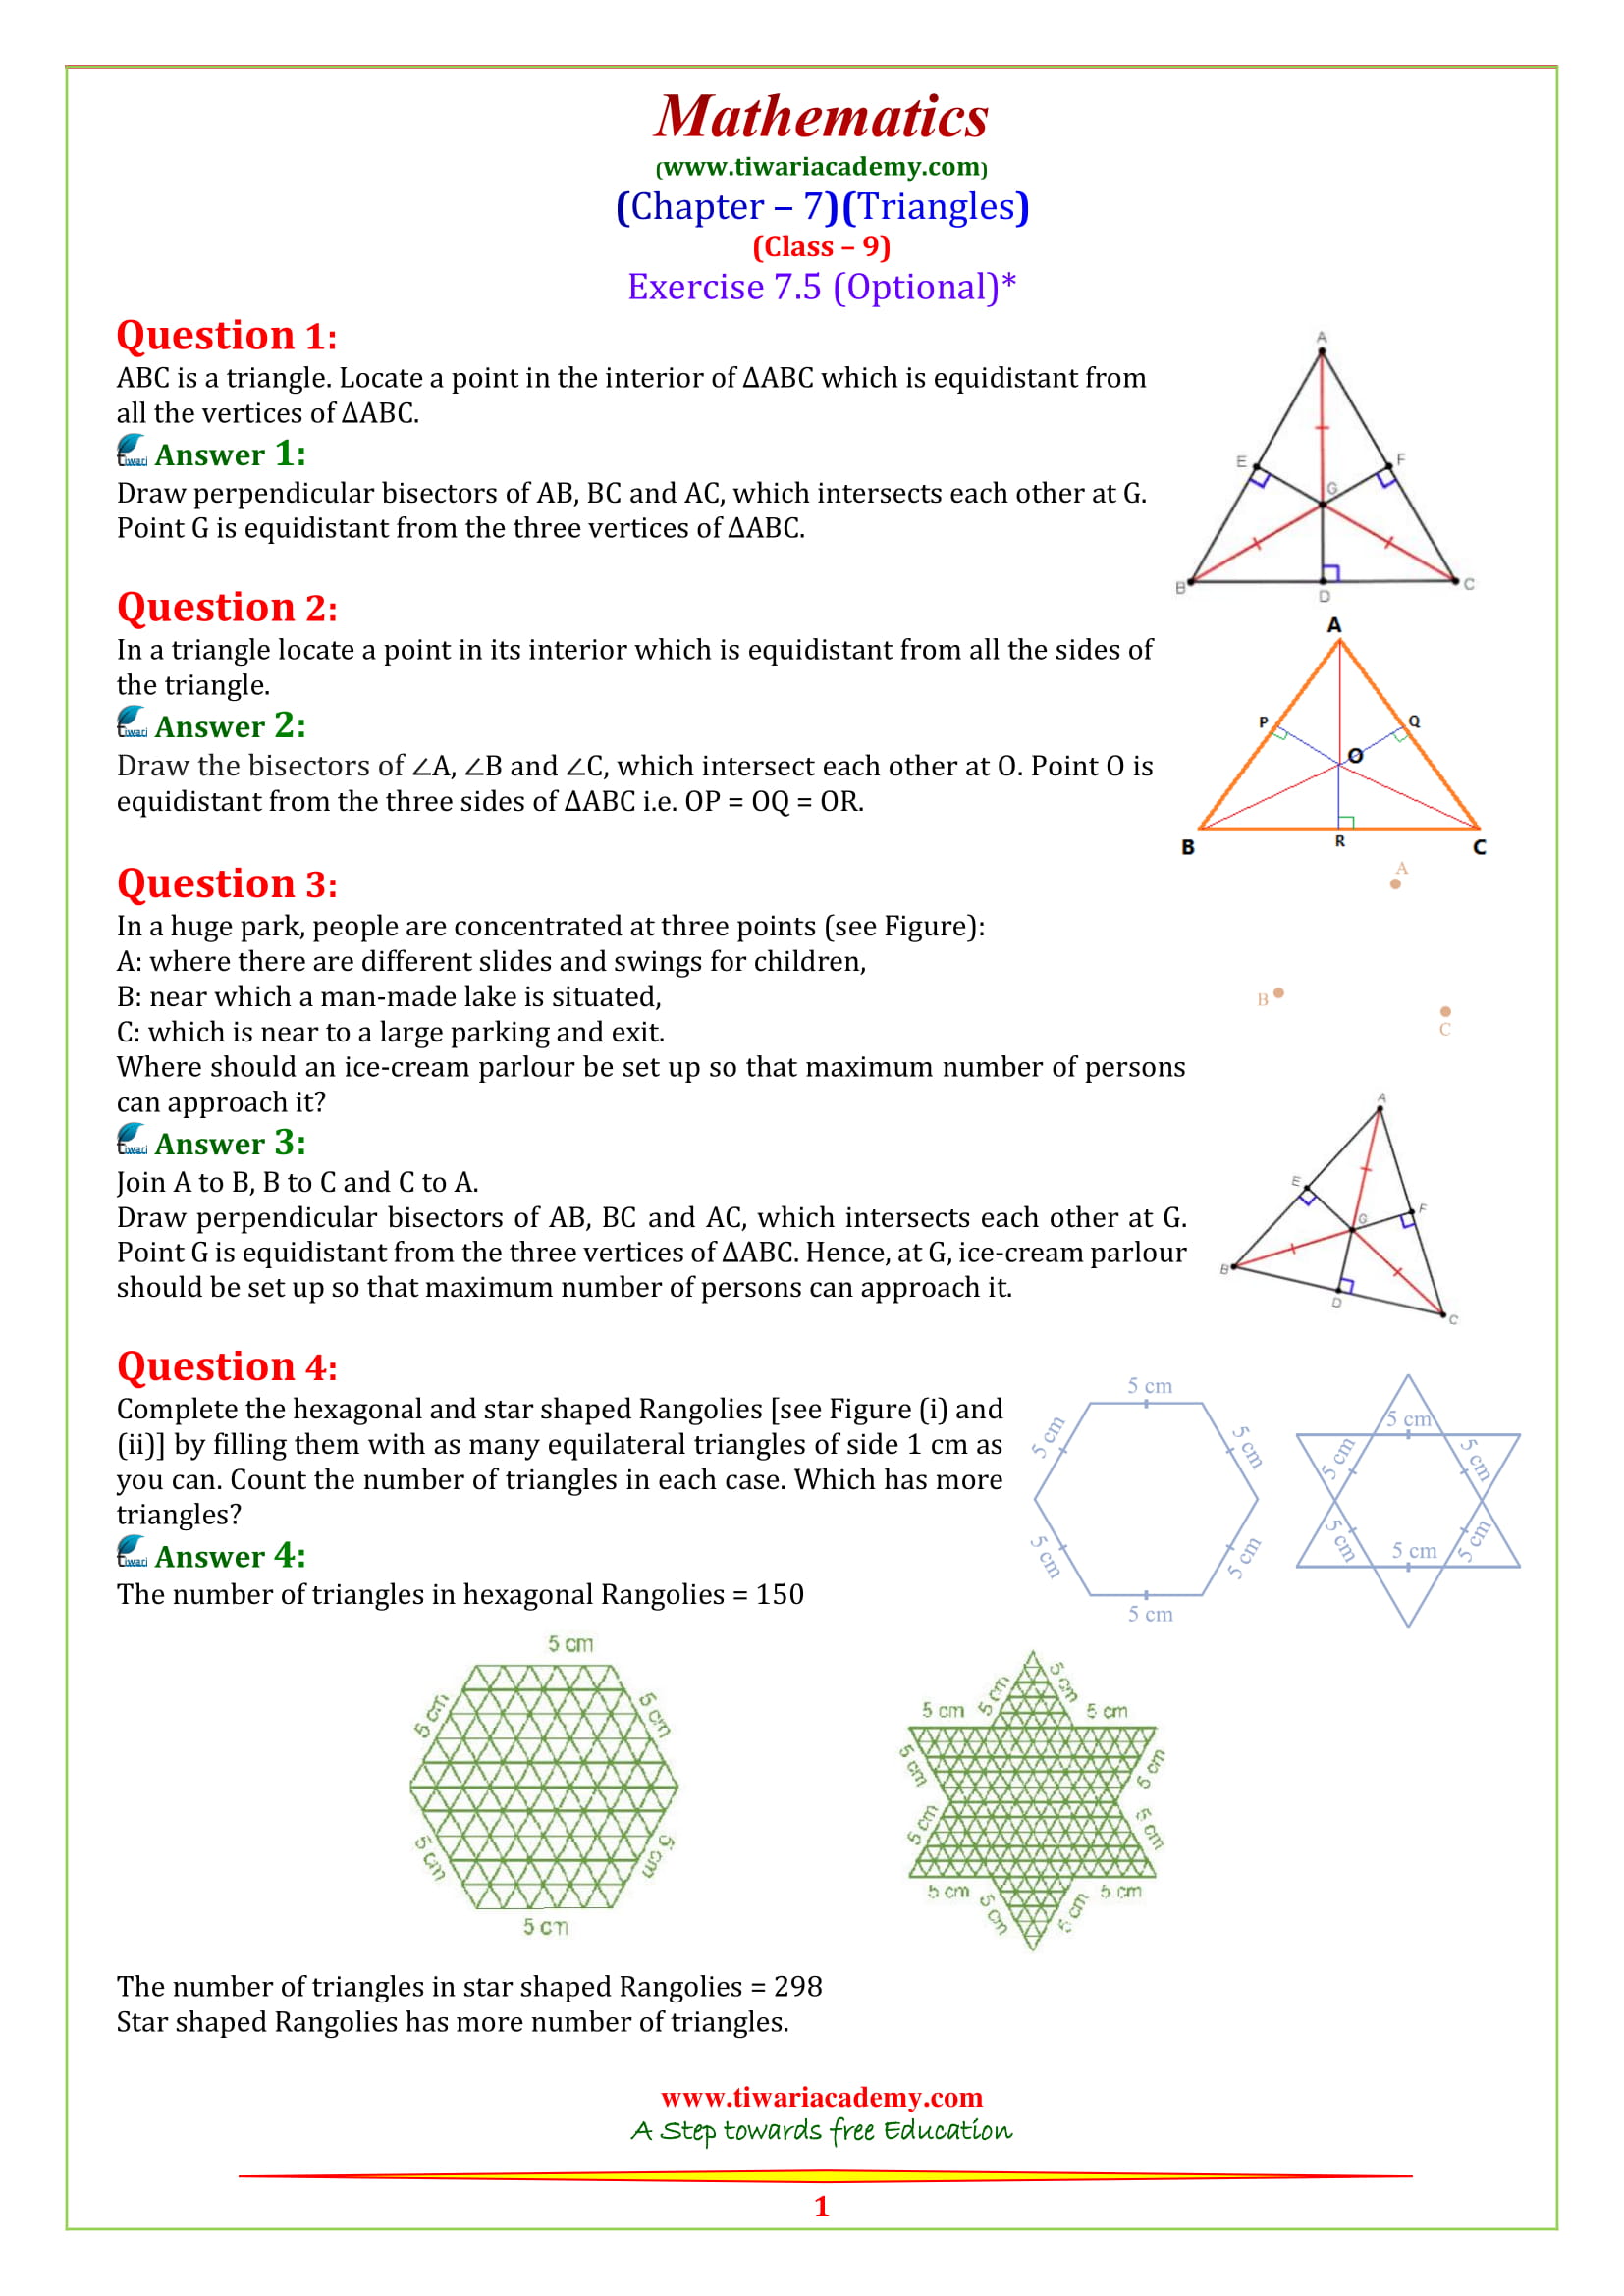 9 Maths Chapter 7 Triangles Optional Exercise 7.5 in English medium